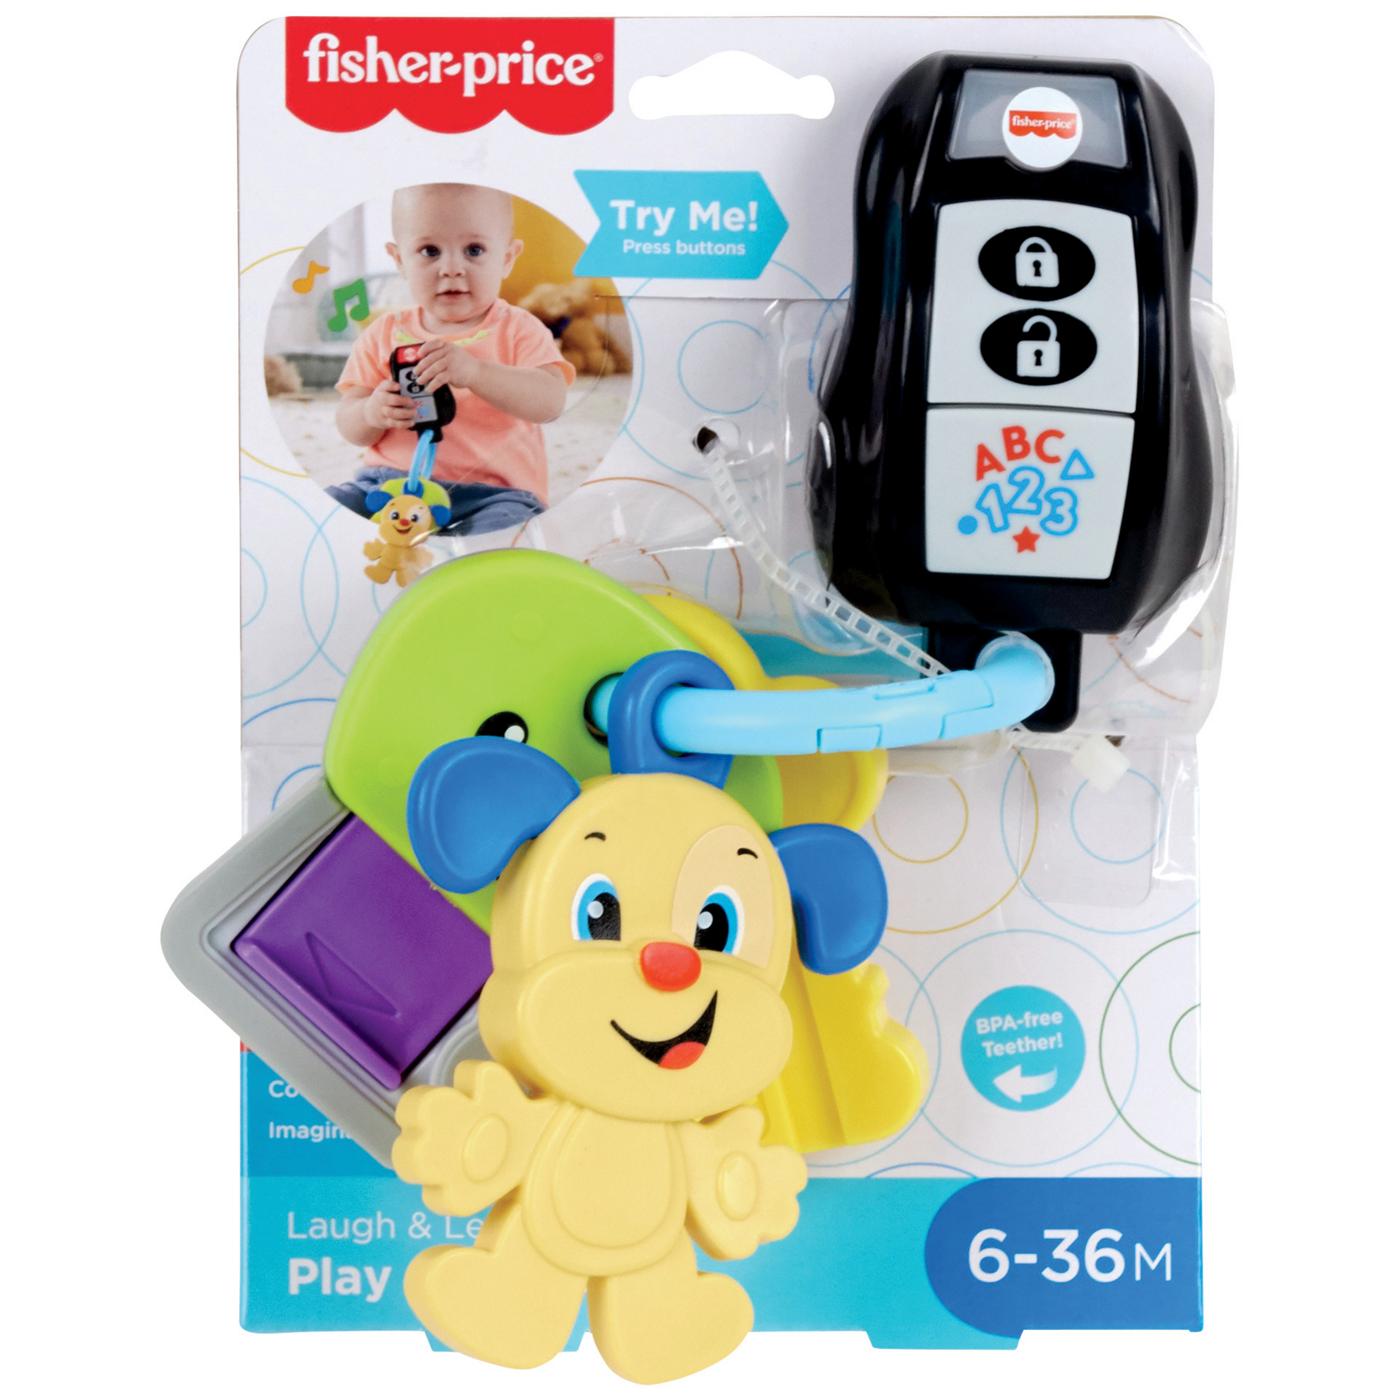 Fisher-Price Laugh & Learn Play Keys; image 1 of 2